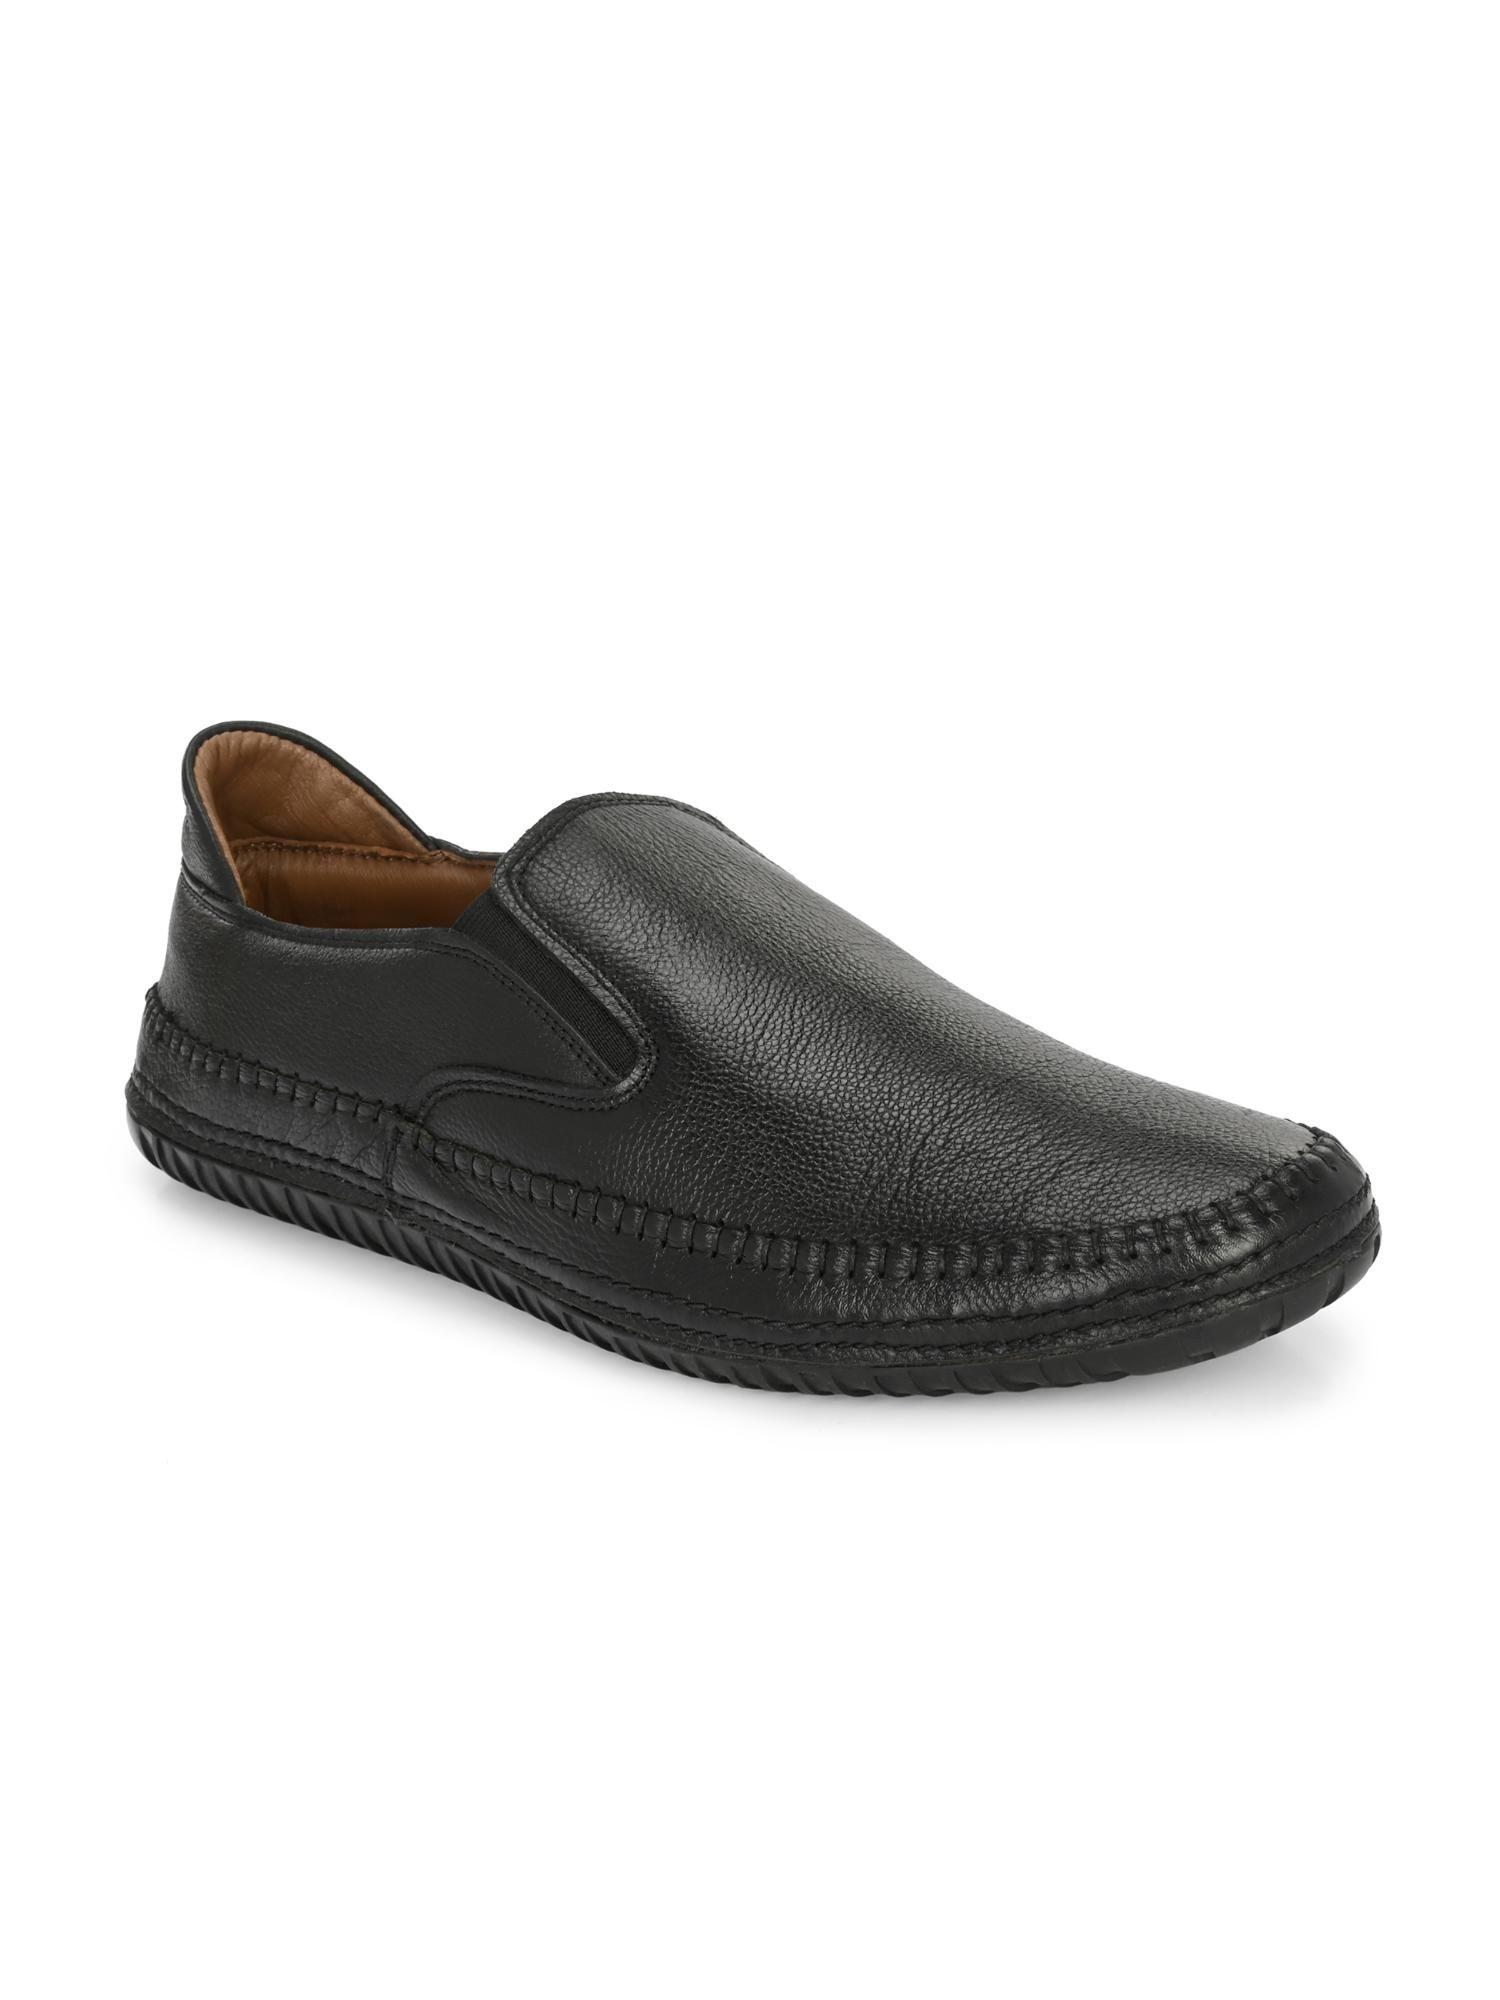 Black Genuine Leather Flexible Shoe with PU Footbed